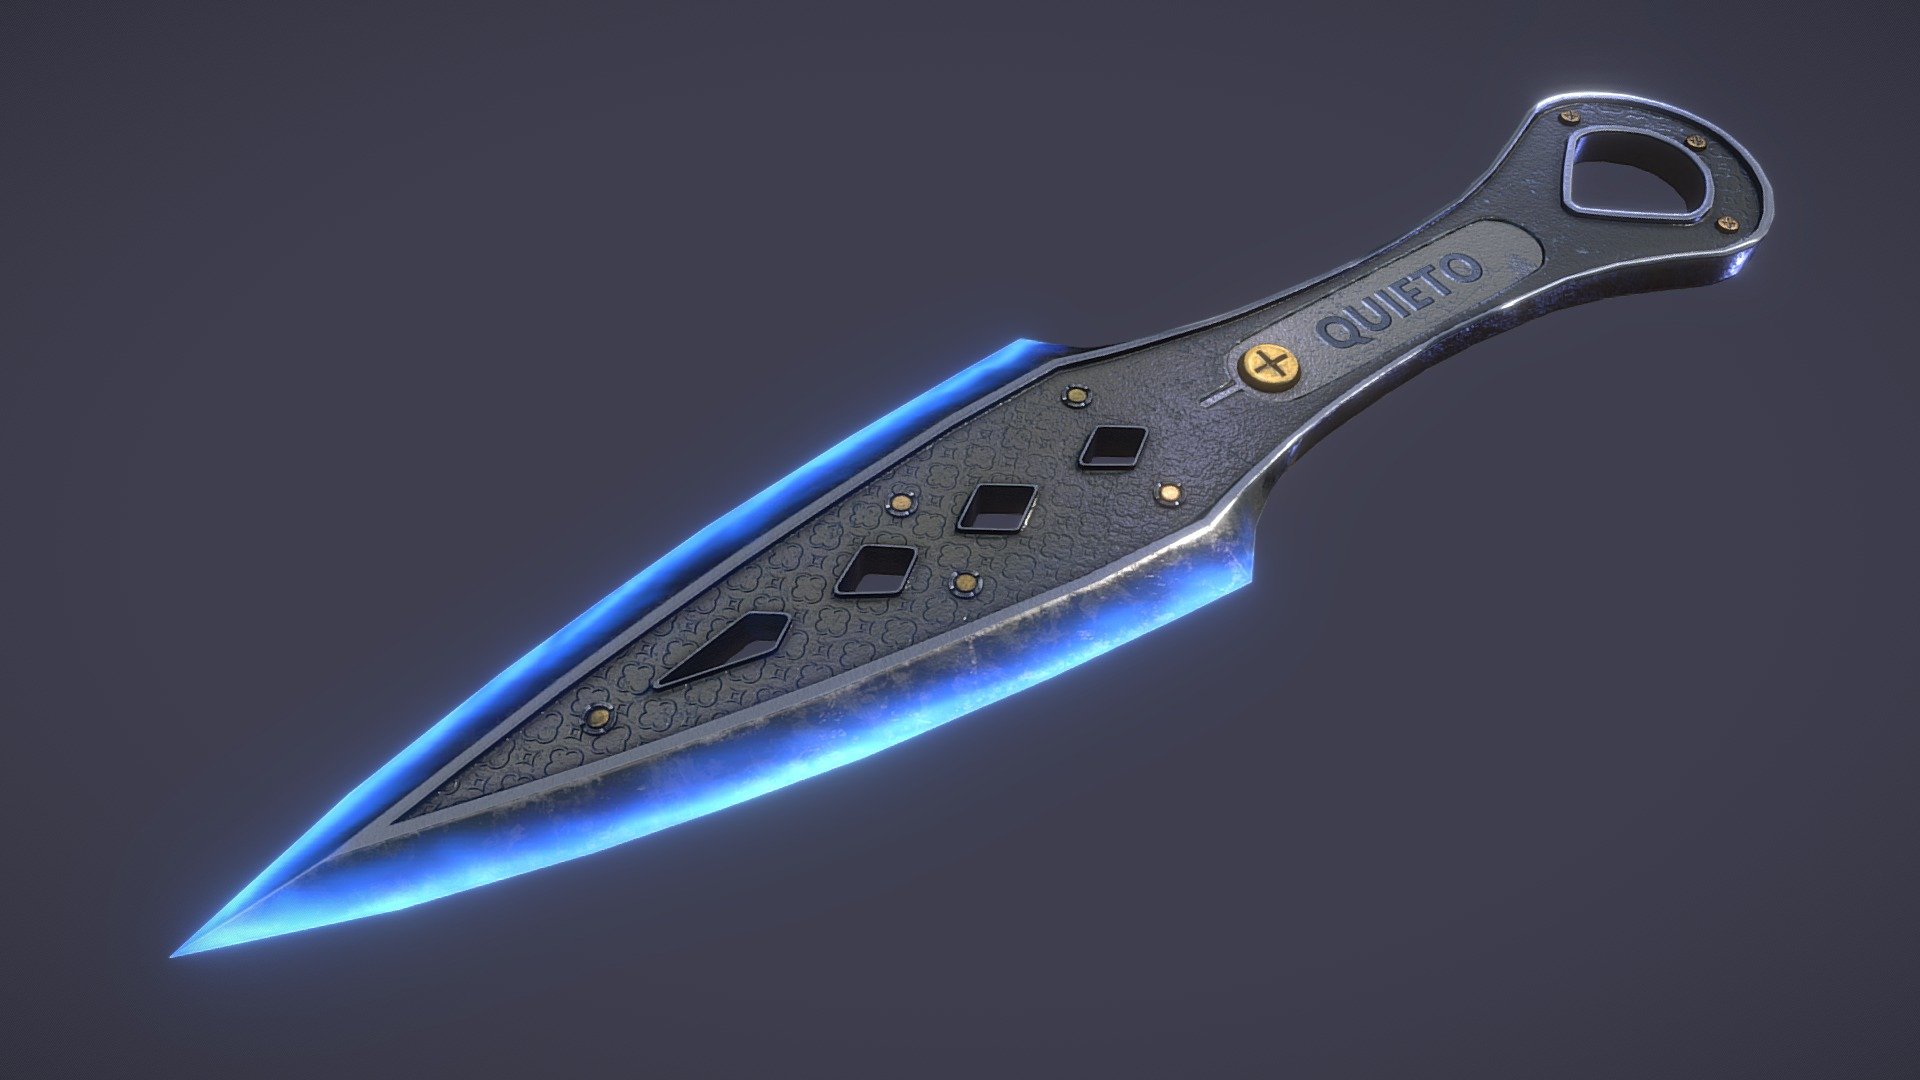 Here is a simple model of Wraith's Kunai heirloom from Apex legends. I didn't want to throw £500 at EA for pack openings only to be rejected a chance at unlocking the heirloom in game, so I decided to model it myself. Much cheaper this way. If you like the model then feel free to use it in personal projects or just do what I do and come here to spin the model around in the viewer to imagine what it must be like to be one of the lucky in-game Wraith heirloom owners 3d model